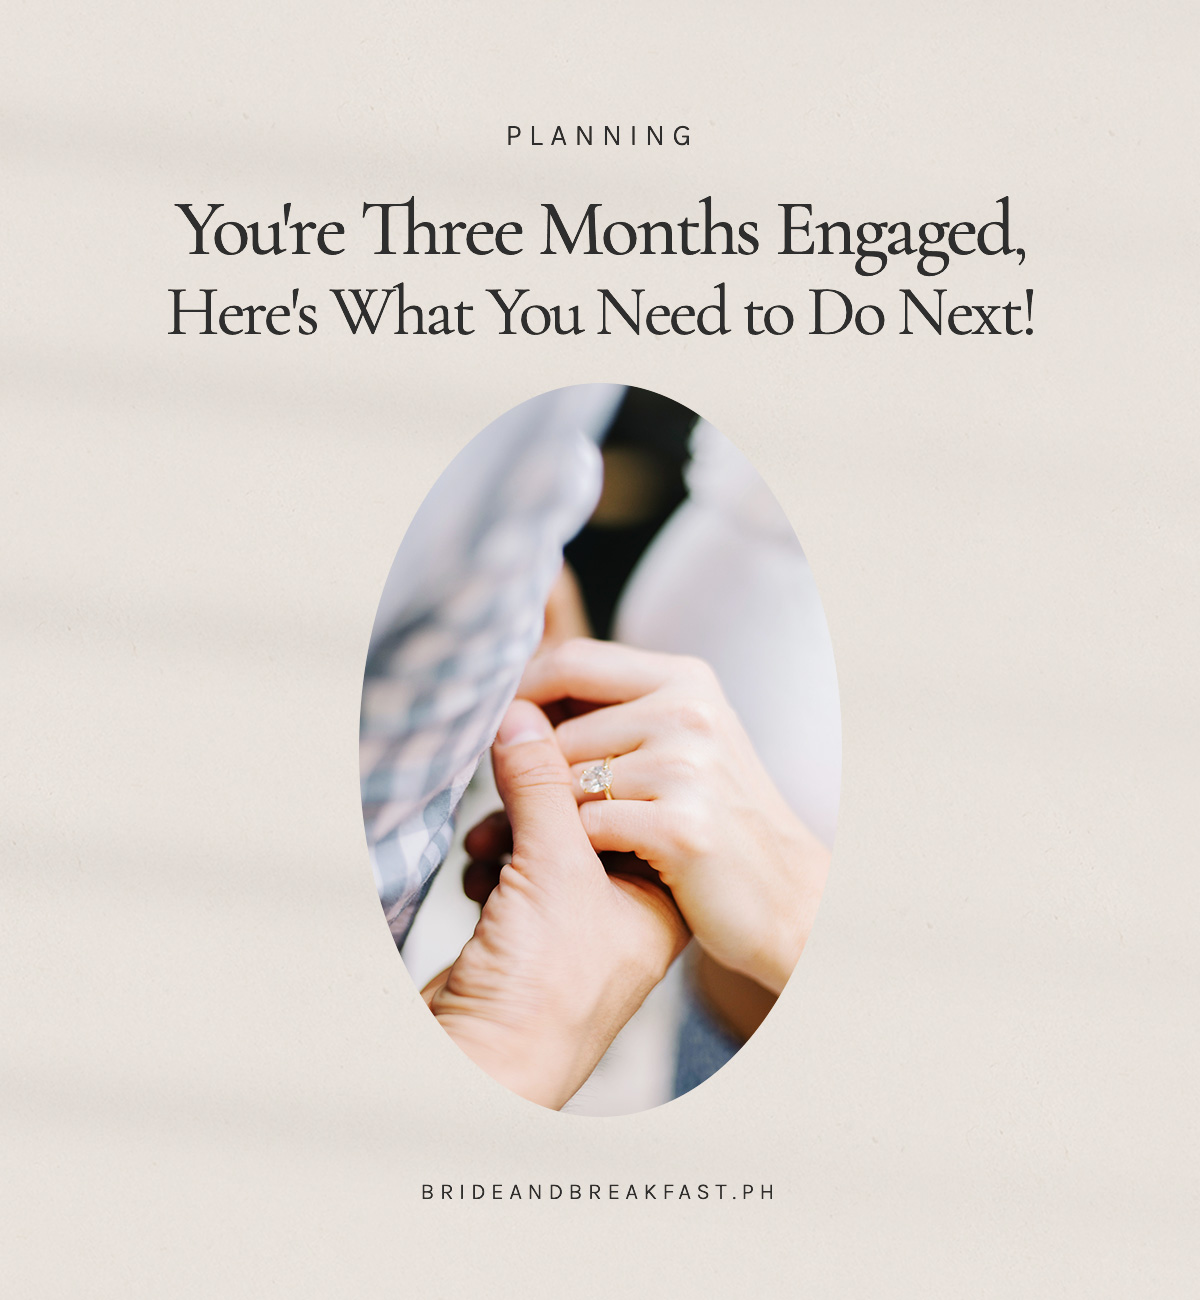 You're Three Months Engaged! Here's What You Need to Do Next